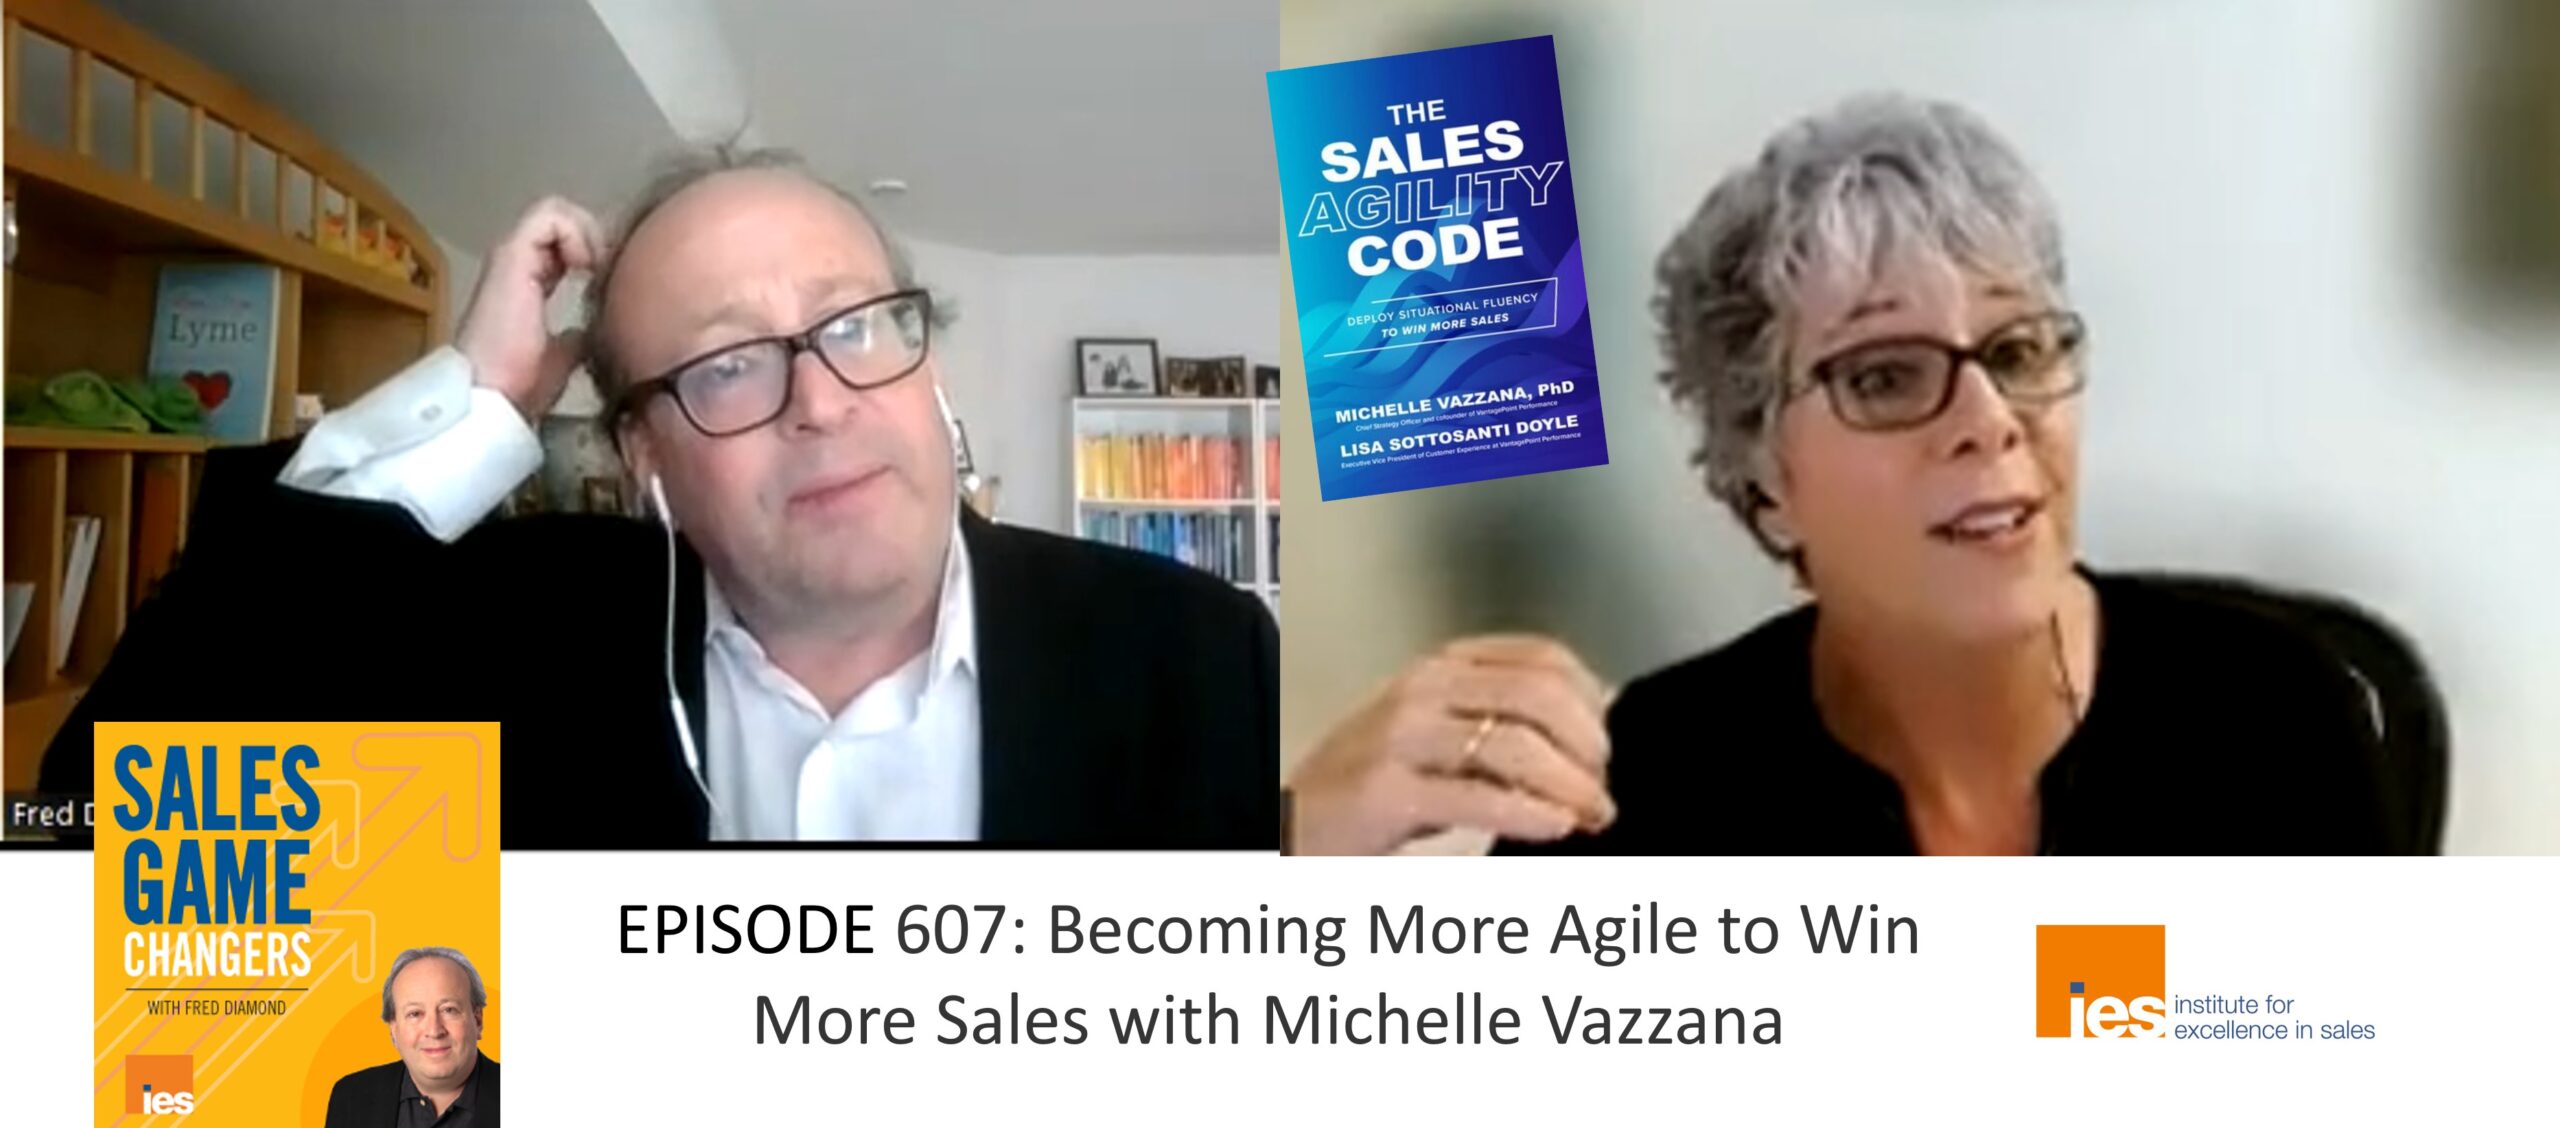 EPISODE 607: Becoming More Agile to Win More Sales with Michelle Vazzana